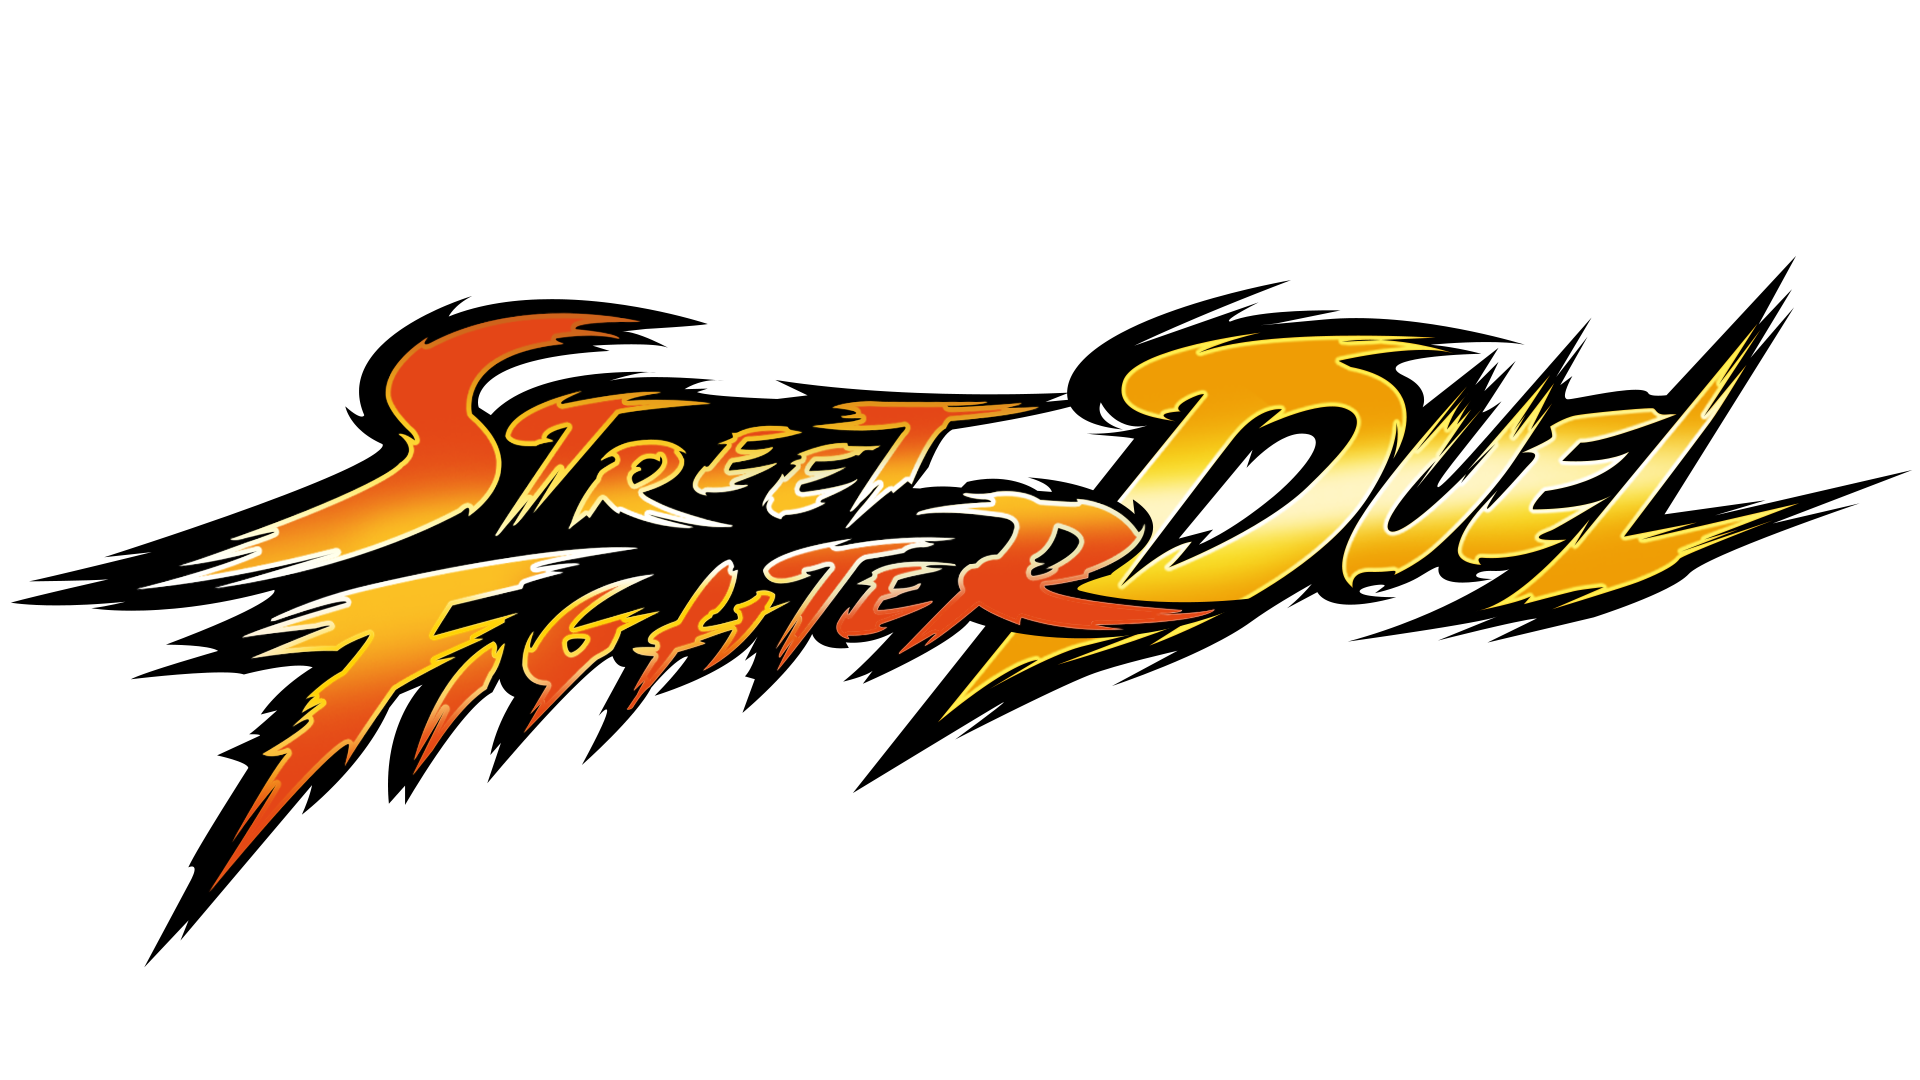 Street Fighter Duel Help Center home page